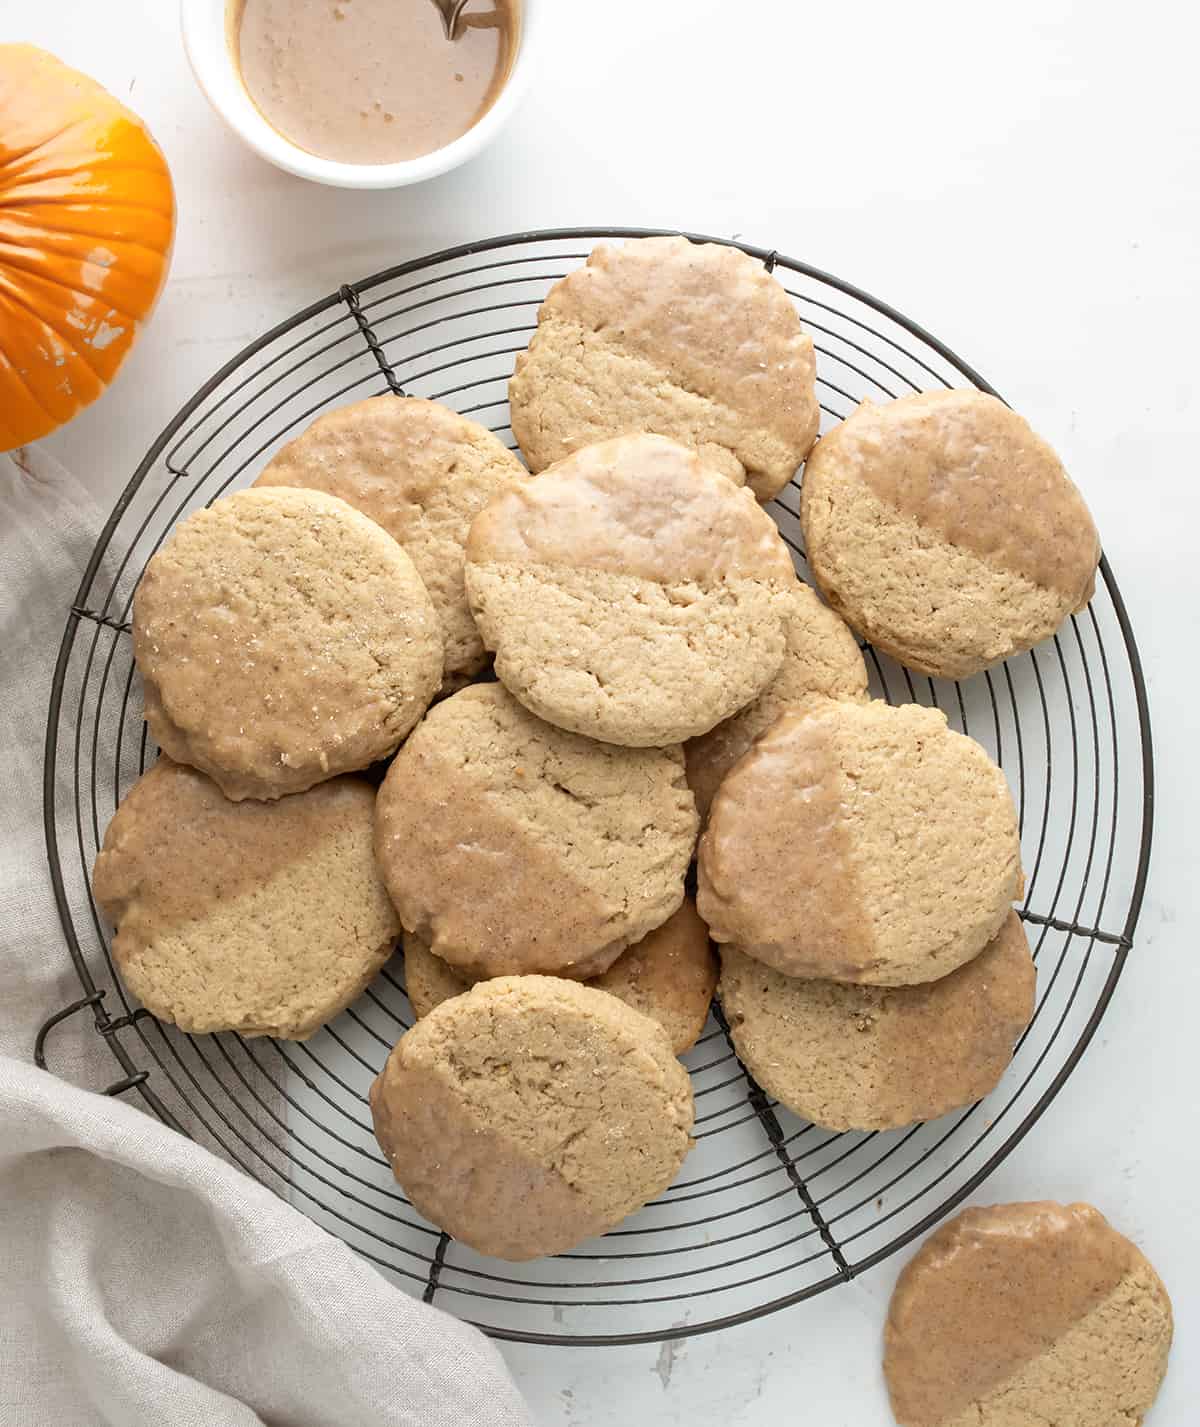 Tray of Pumpkin Spice Butter Cookies on a White Table with Towel and Glaze in a bowl from Overhead. 